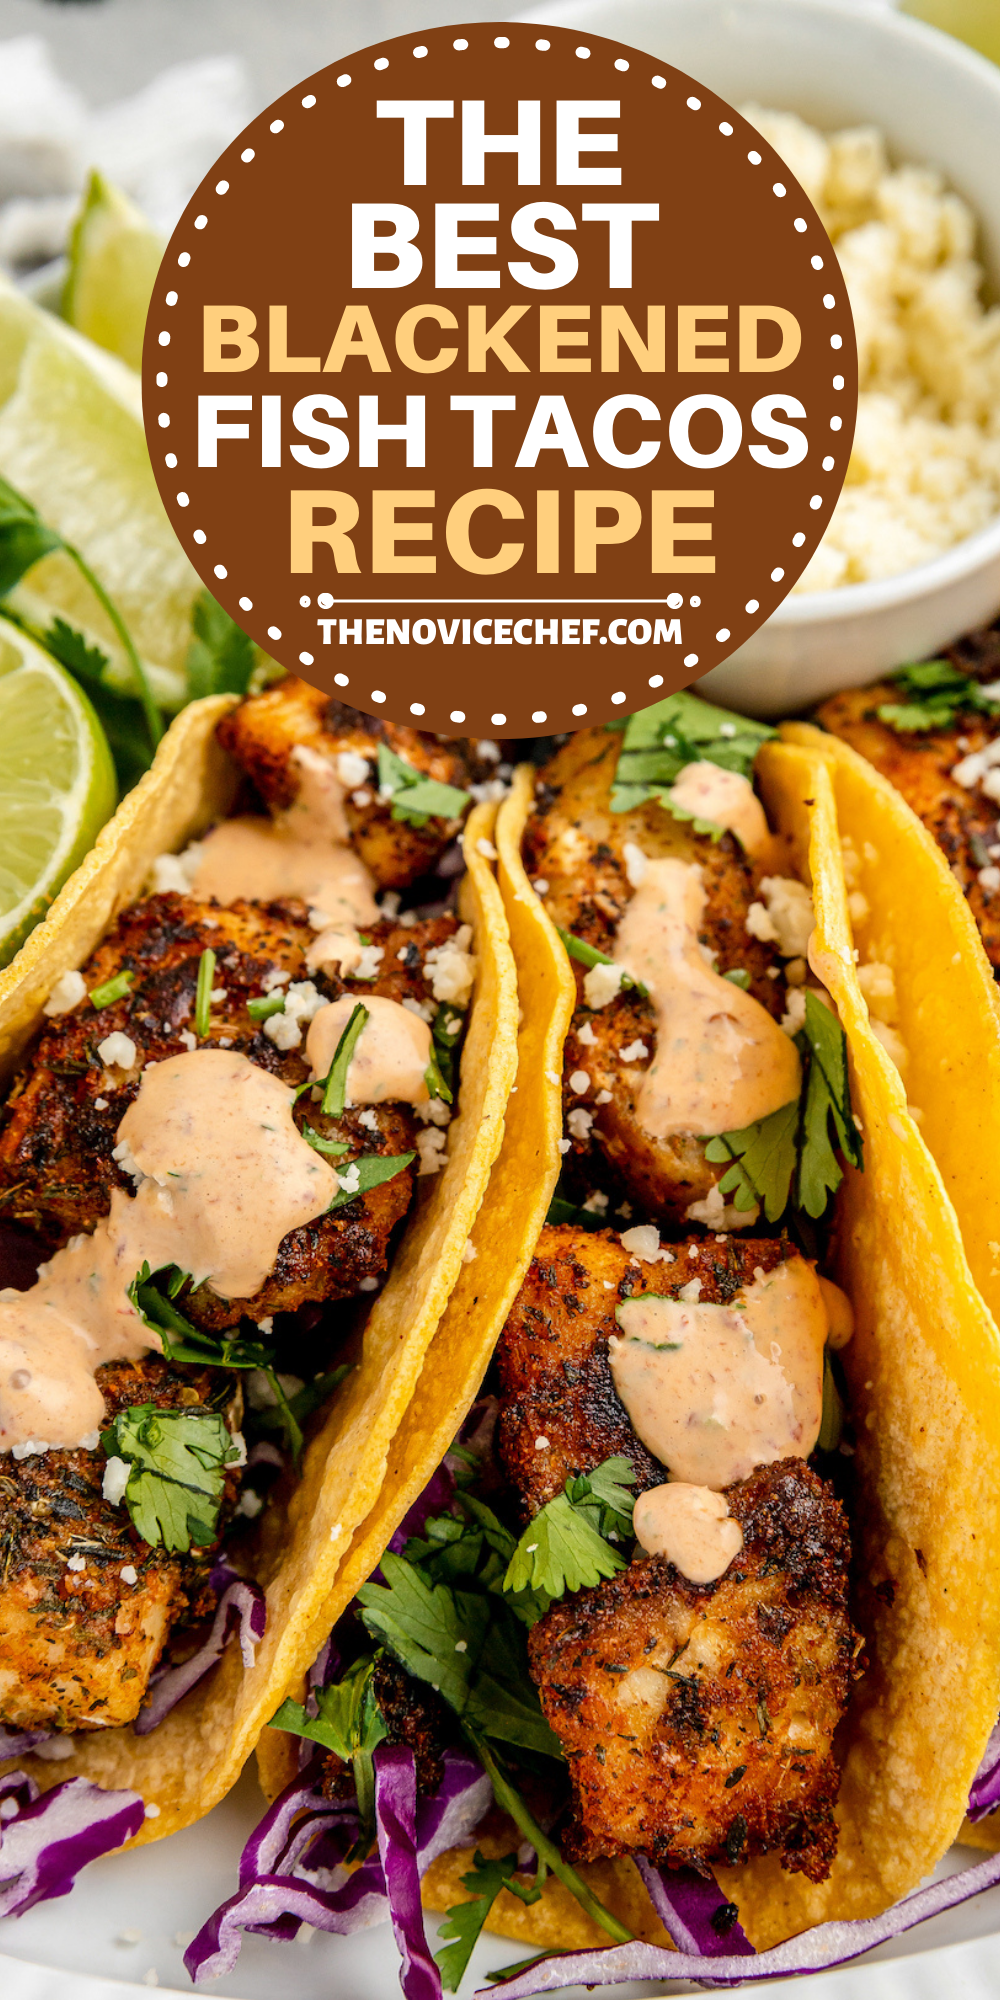 Blackened Fish Tacos With Chipotle,Lime Sauce | The BEST Fish